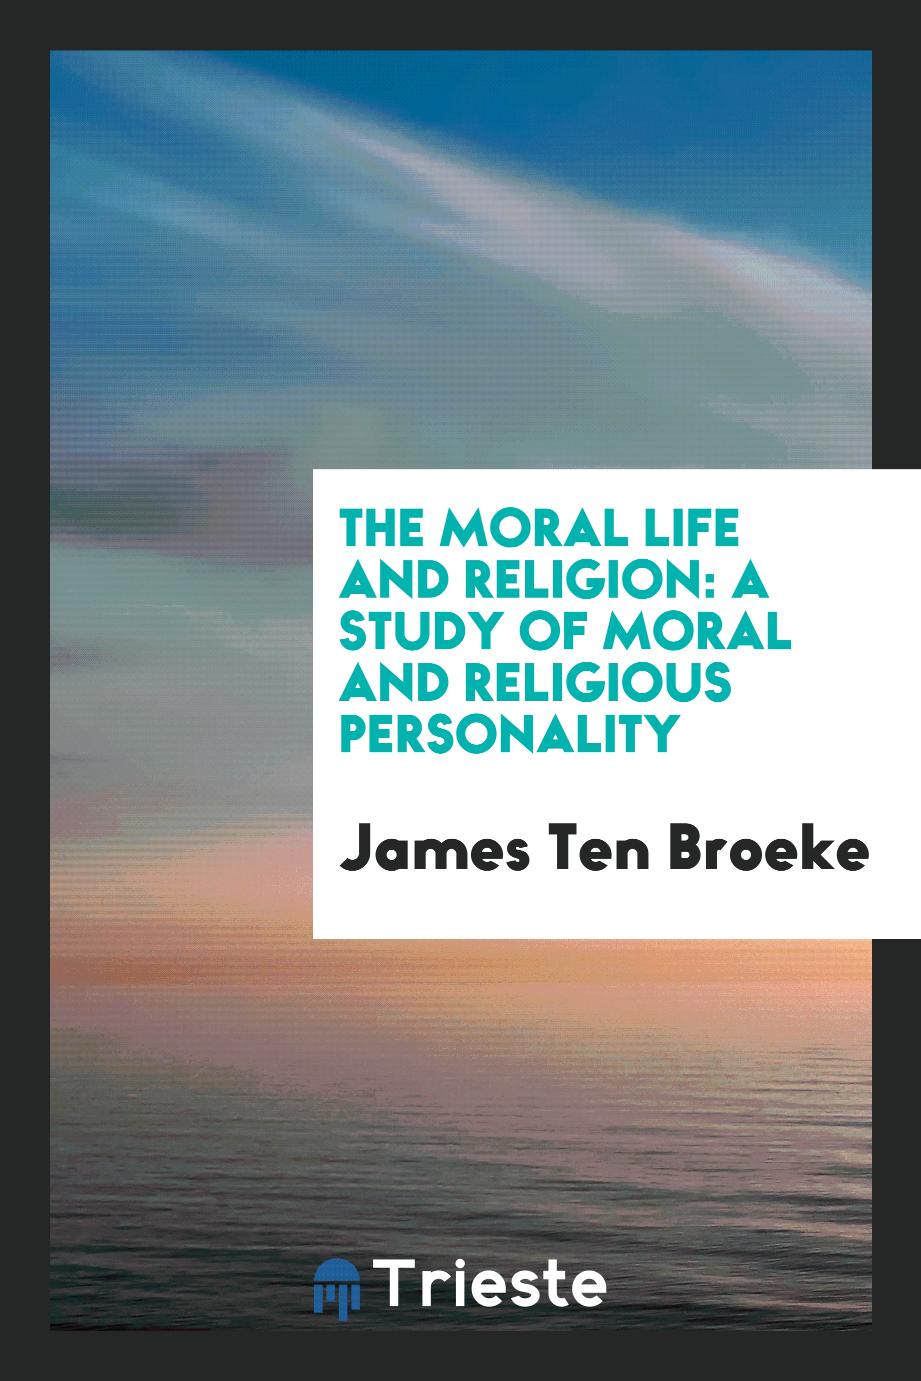 The moral life and religion: a study of moral and religious personality